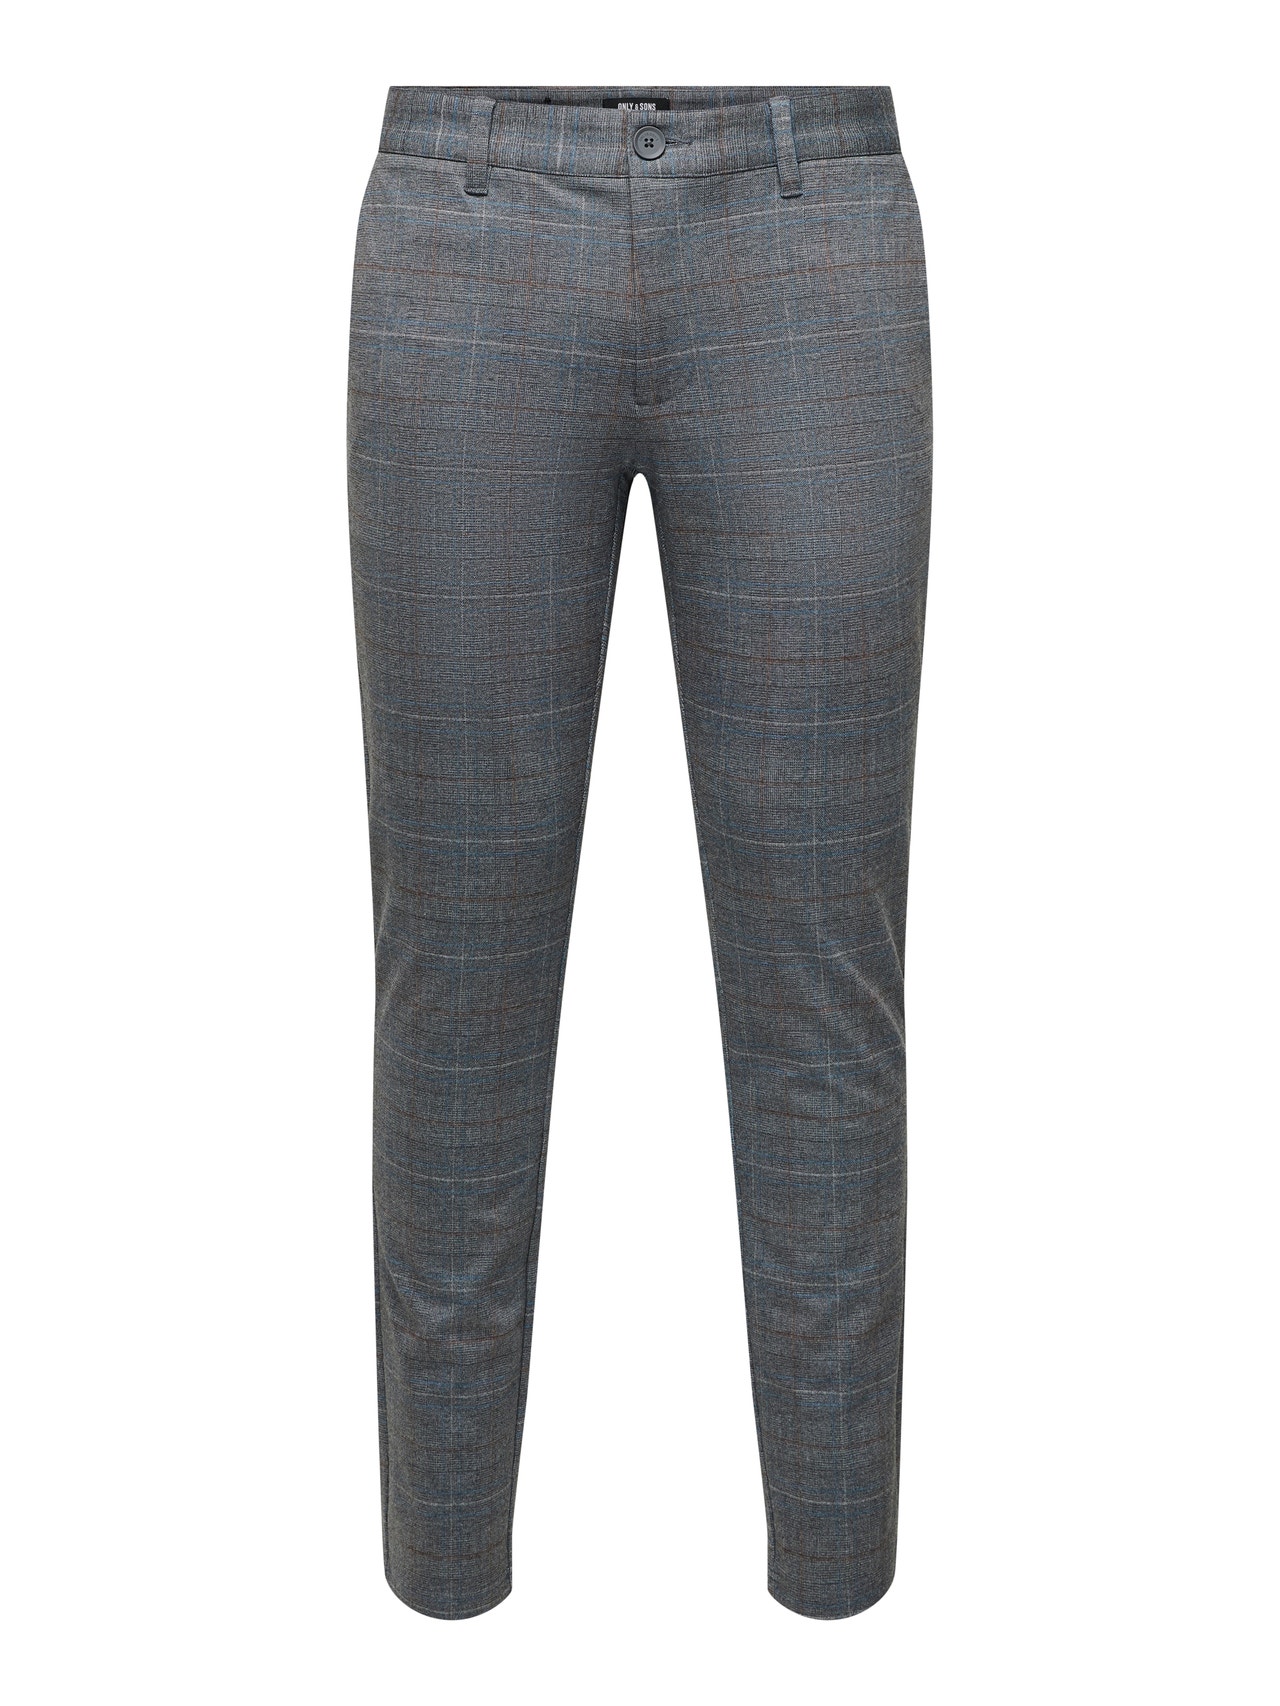 ONLY & SONS ONSMARK TAP CHECK 02092 -Grey Pinstripe - 22025378